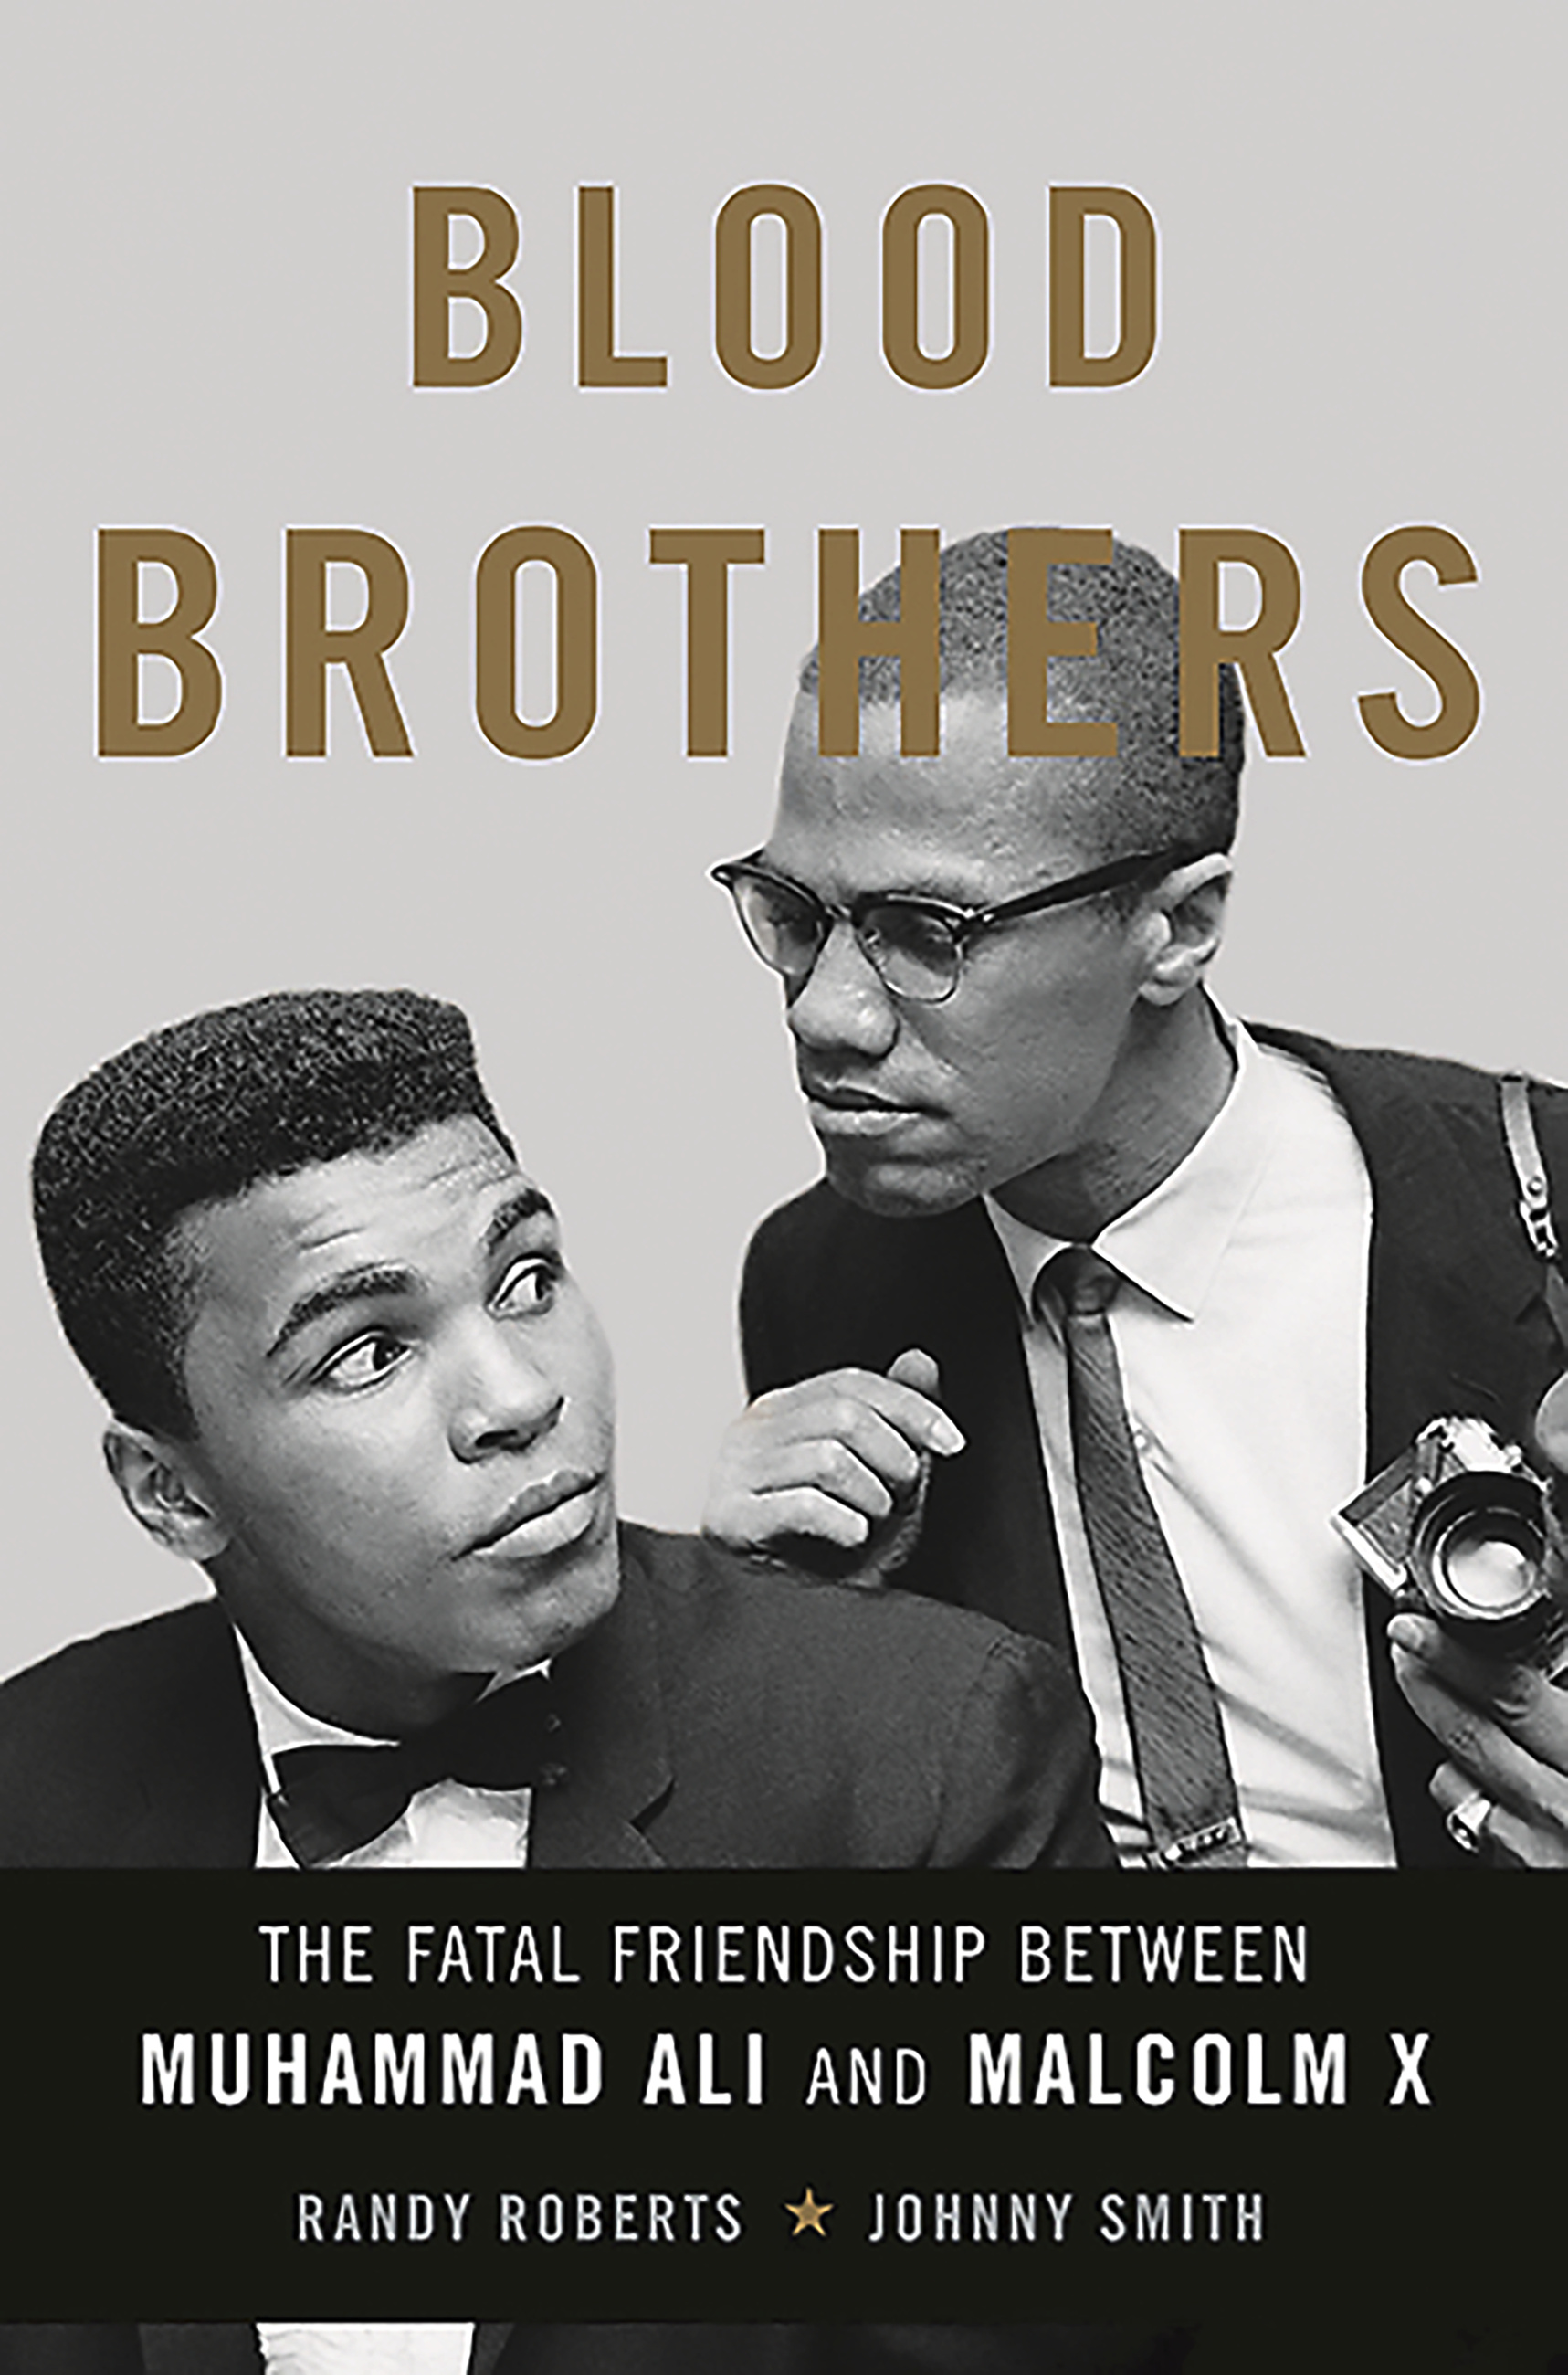 Blood Brothers The Fatal Friendship Between Muhammad Ali and Malcolm X